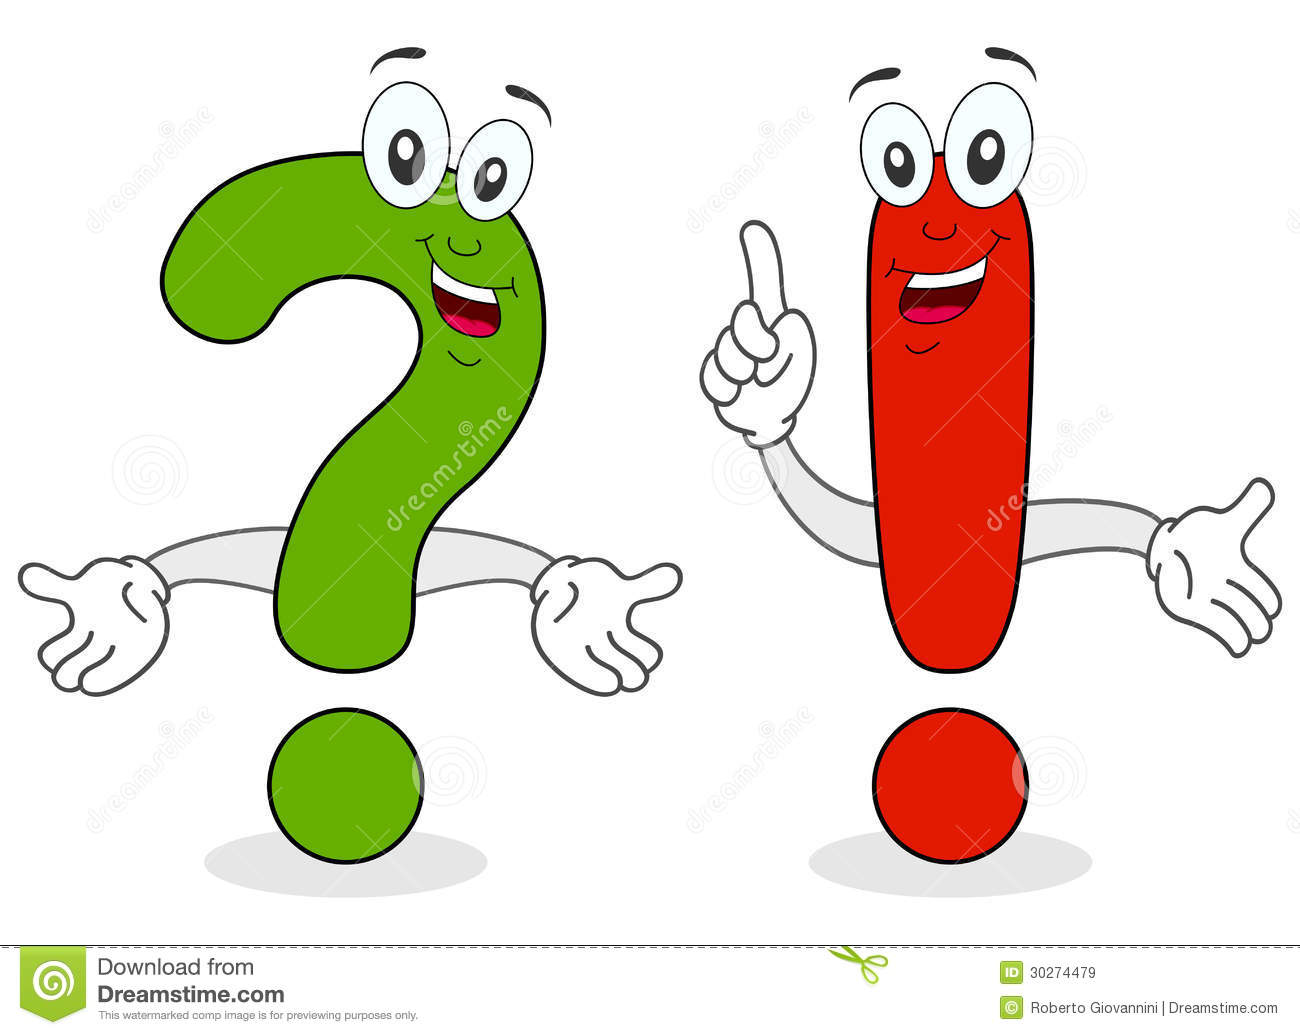 https://www.dreamstime.com/royalty-free-stock-images-two-cartoon-character-smiling-green-question-mark-red-exclamation-point-image30274479